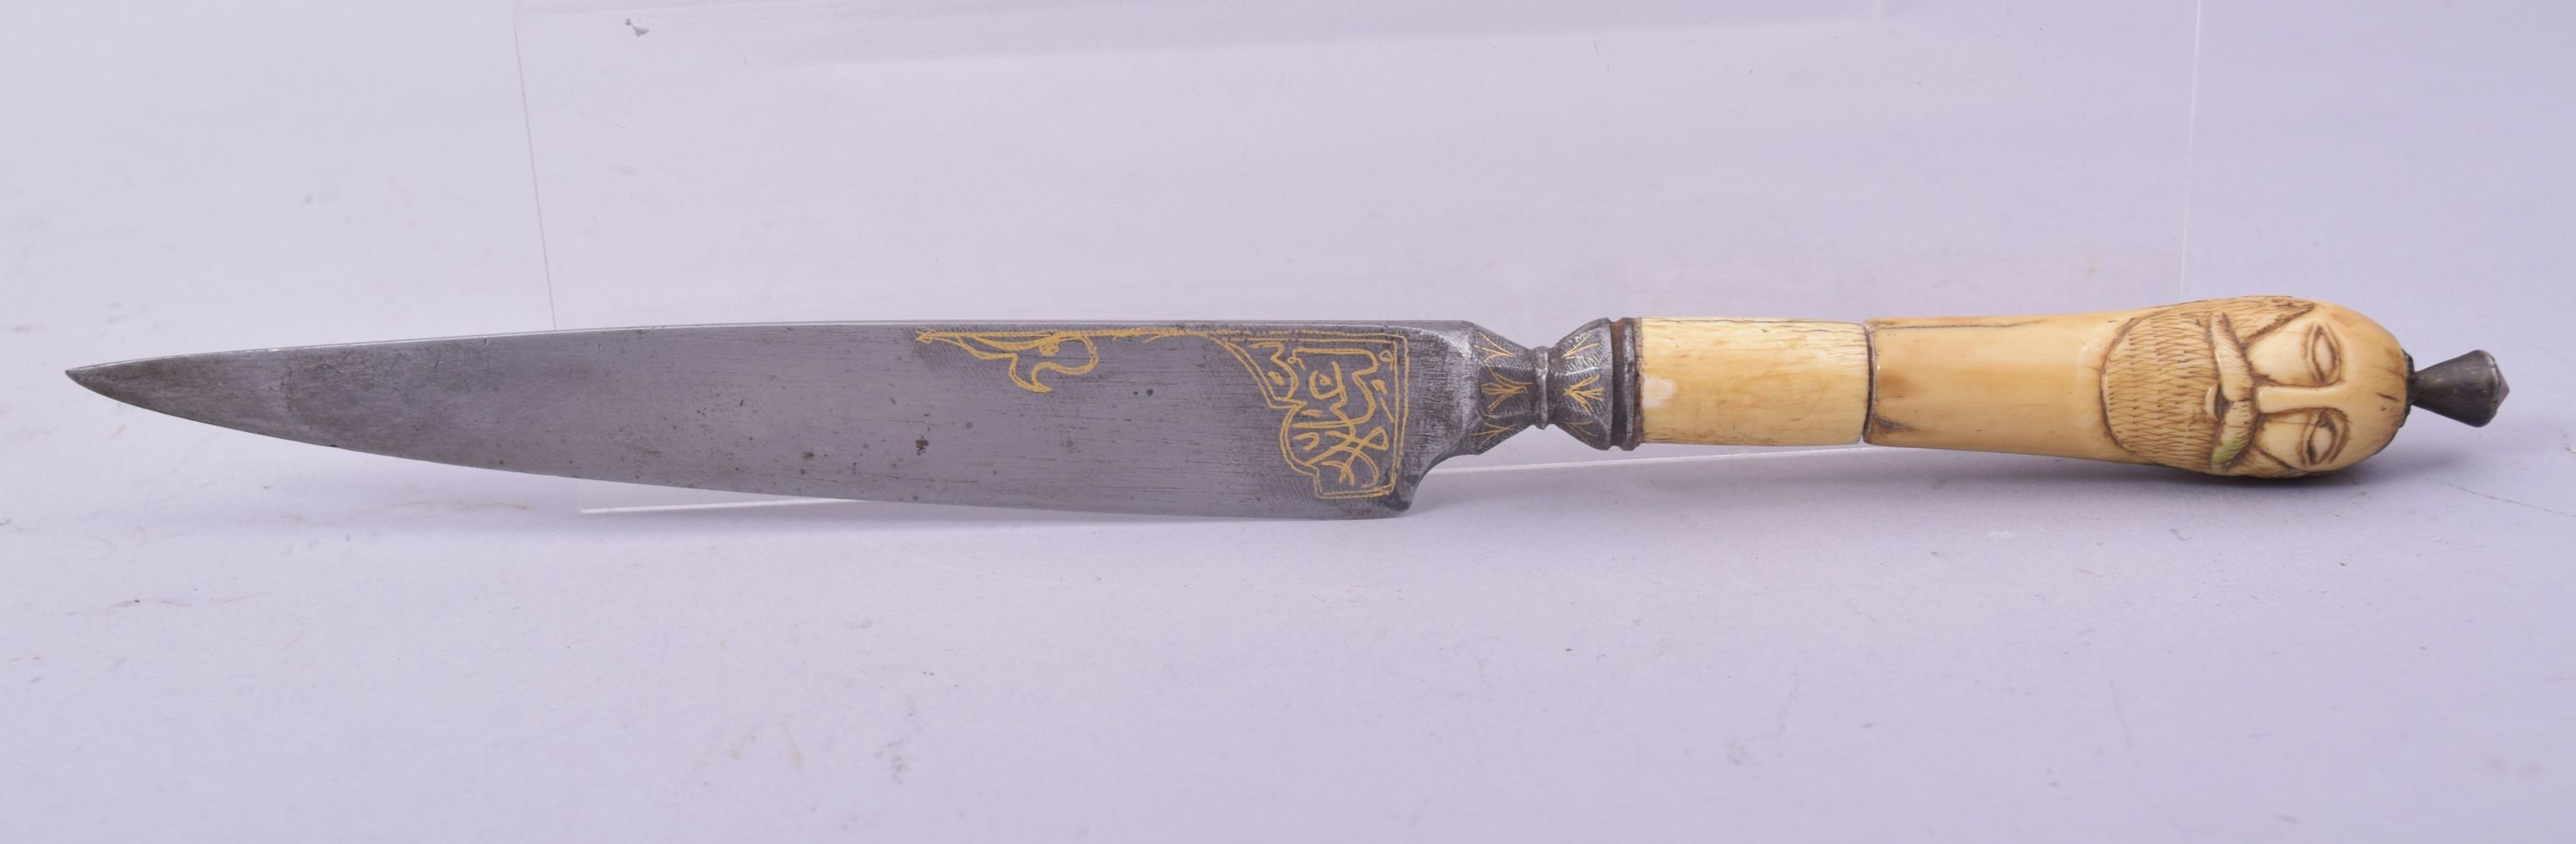 AN UNUSUAL OTTOMAN OR PERSIAN DAGGER with carved walrus handle in the form of a male face to